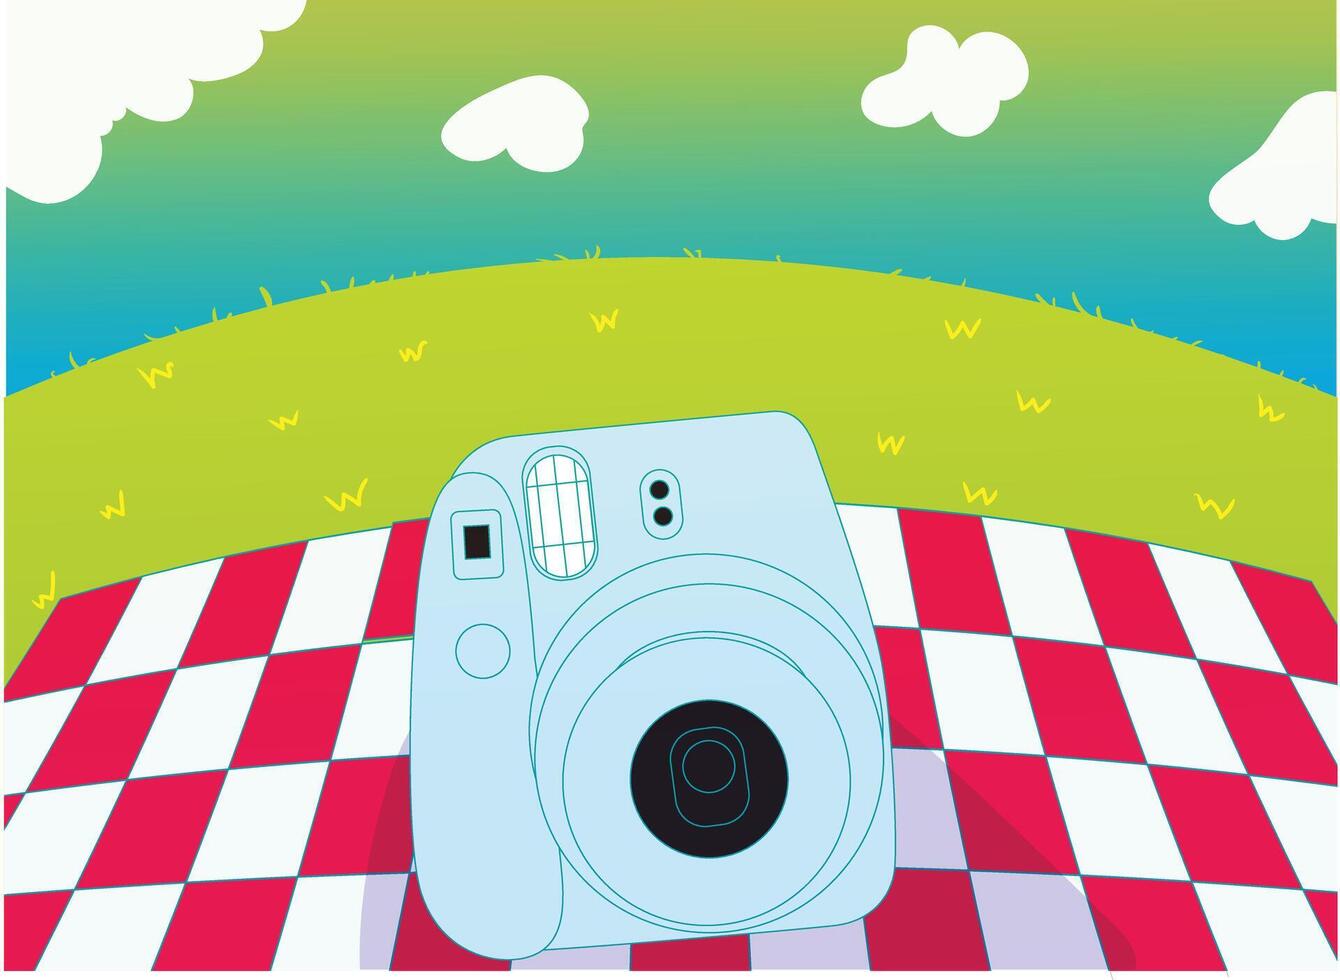 illustration of a polaroid camera placed on a picnic blanket vector